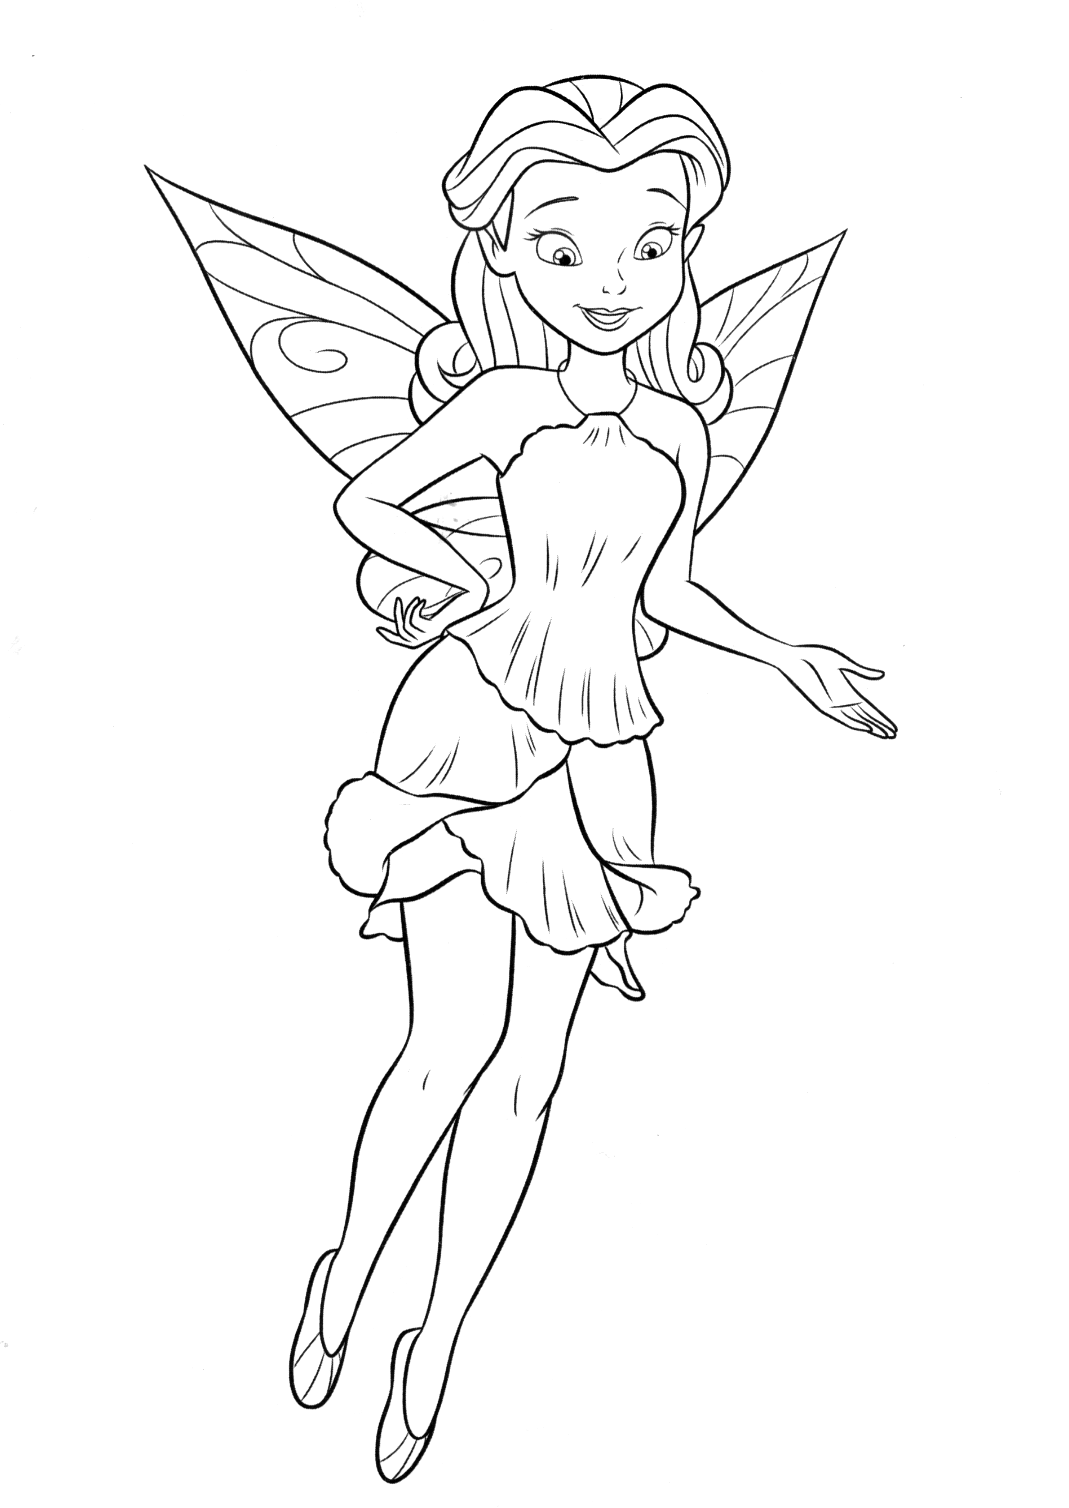 Coloring page - Fairy Rosetta